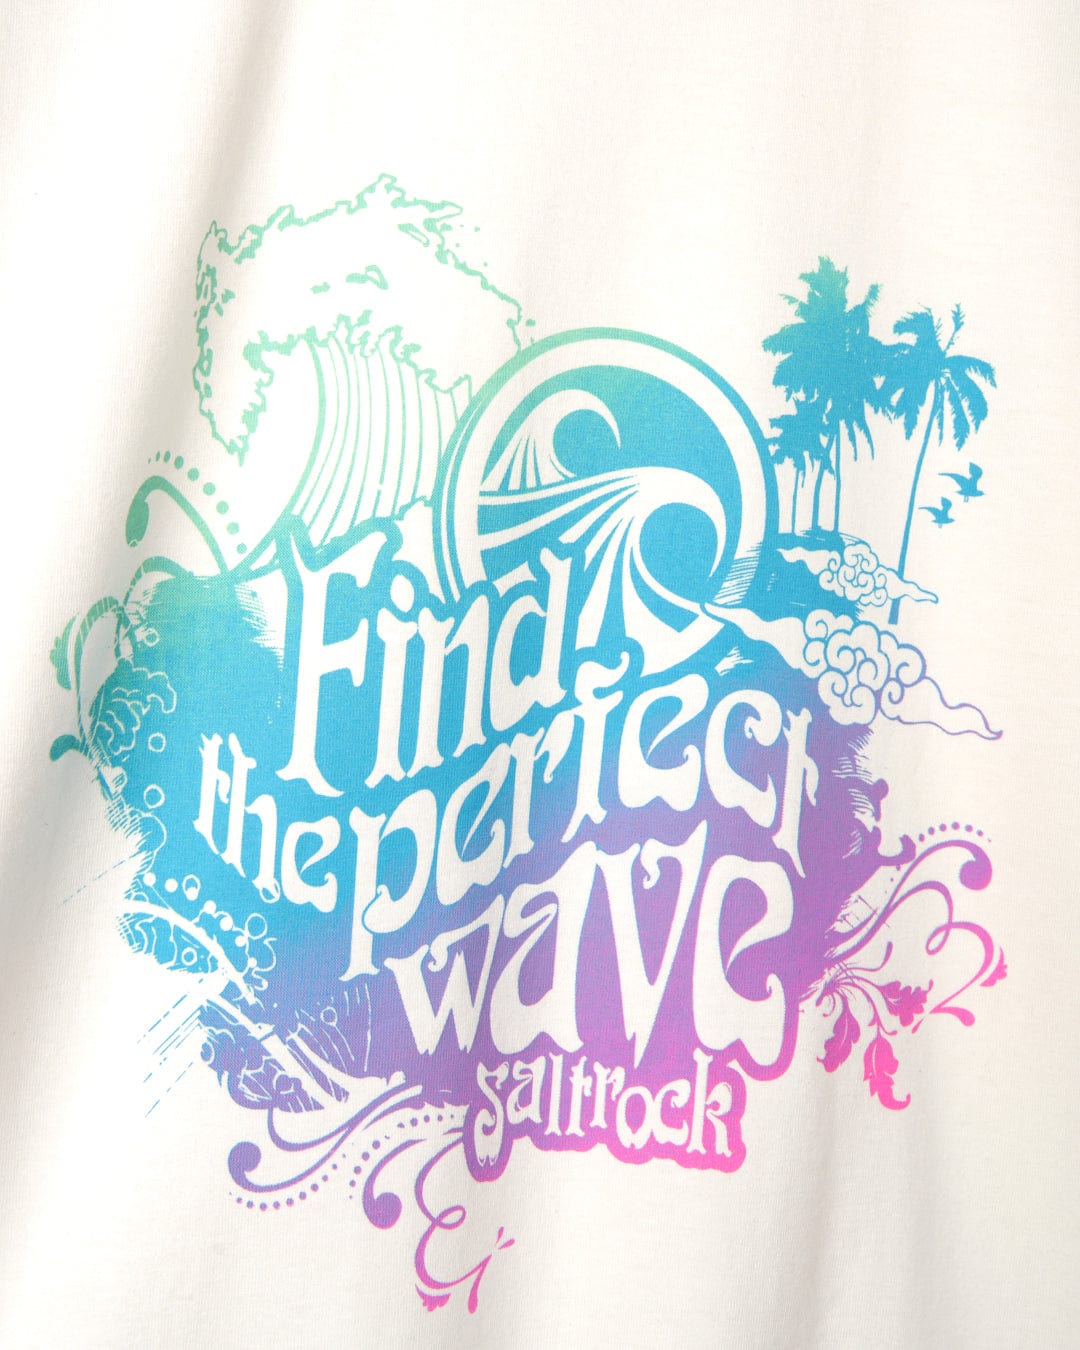 Saltrock Find The Perfect Wave - Womens Short Sleeve T-Shirt with a multi-colored graphic featuring ocean waves, palm trees, and the Saltrock logo.